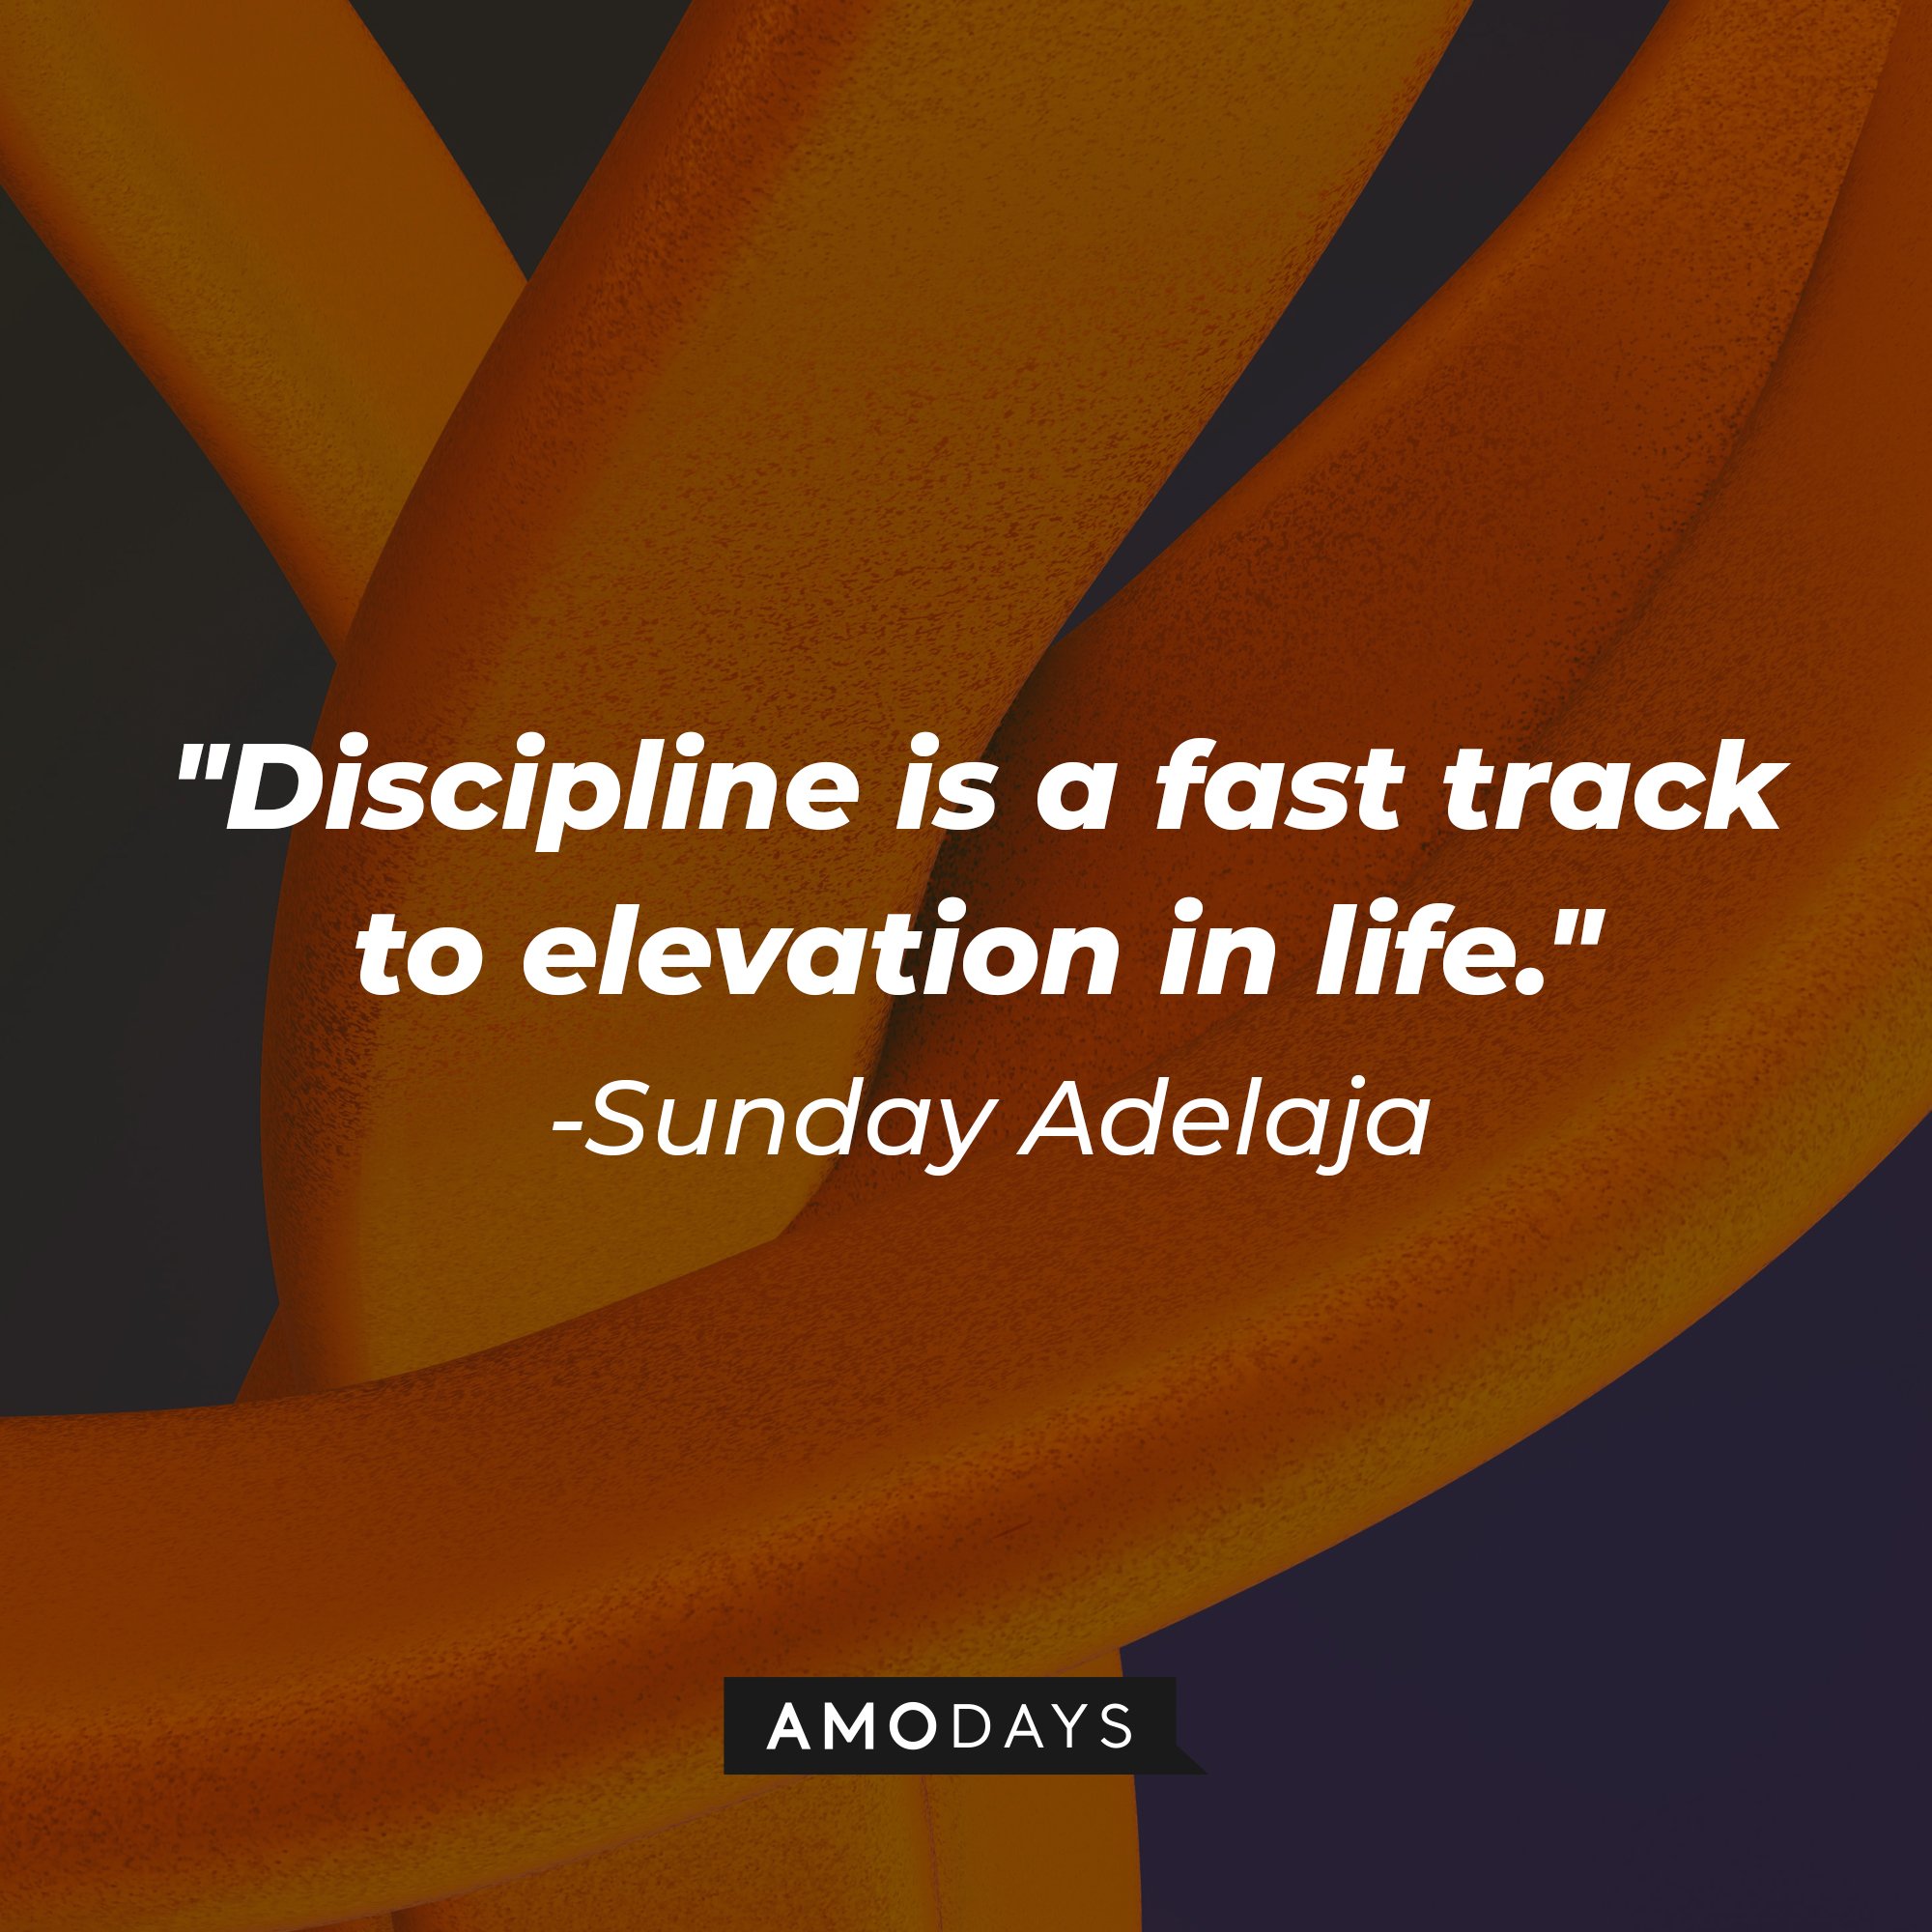 Sunday Adelaja’s quote: "Discipline is a fast track to elevation in life." | Image: AmoDays